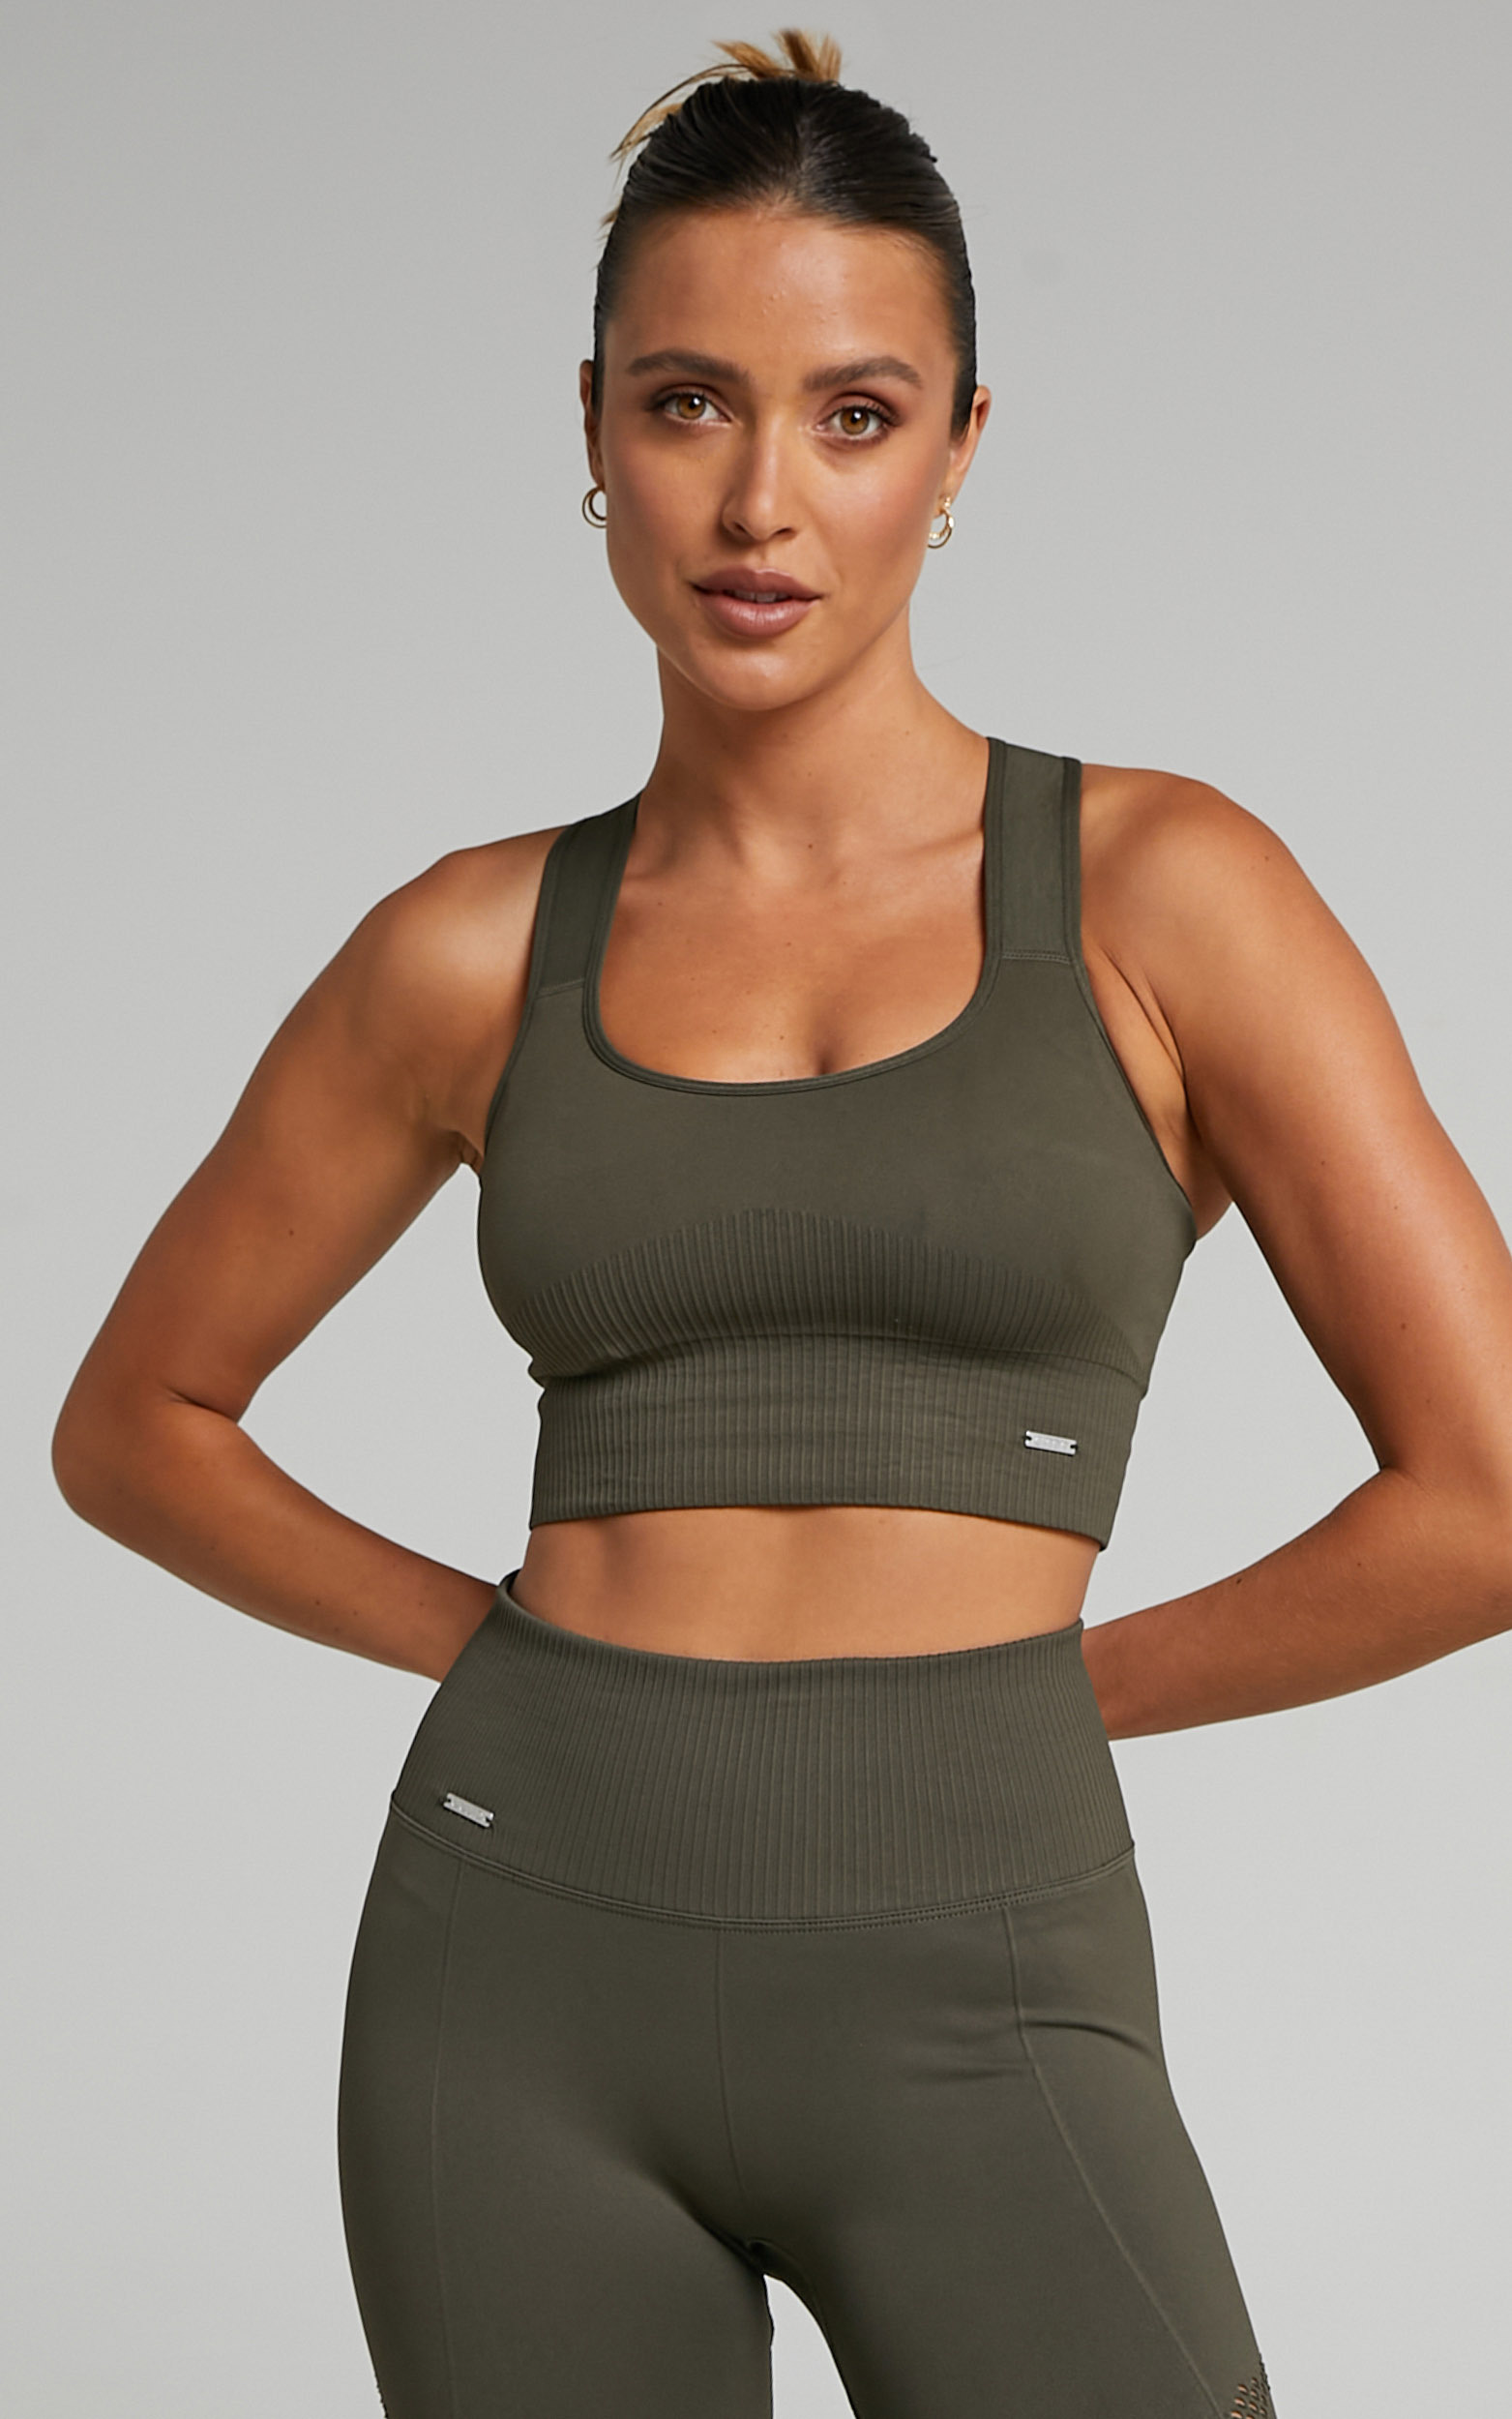 Aim'n - HIGH SUPPORT RIBBED BRA in Khaki - XS, GRN1, hi-res image number null